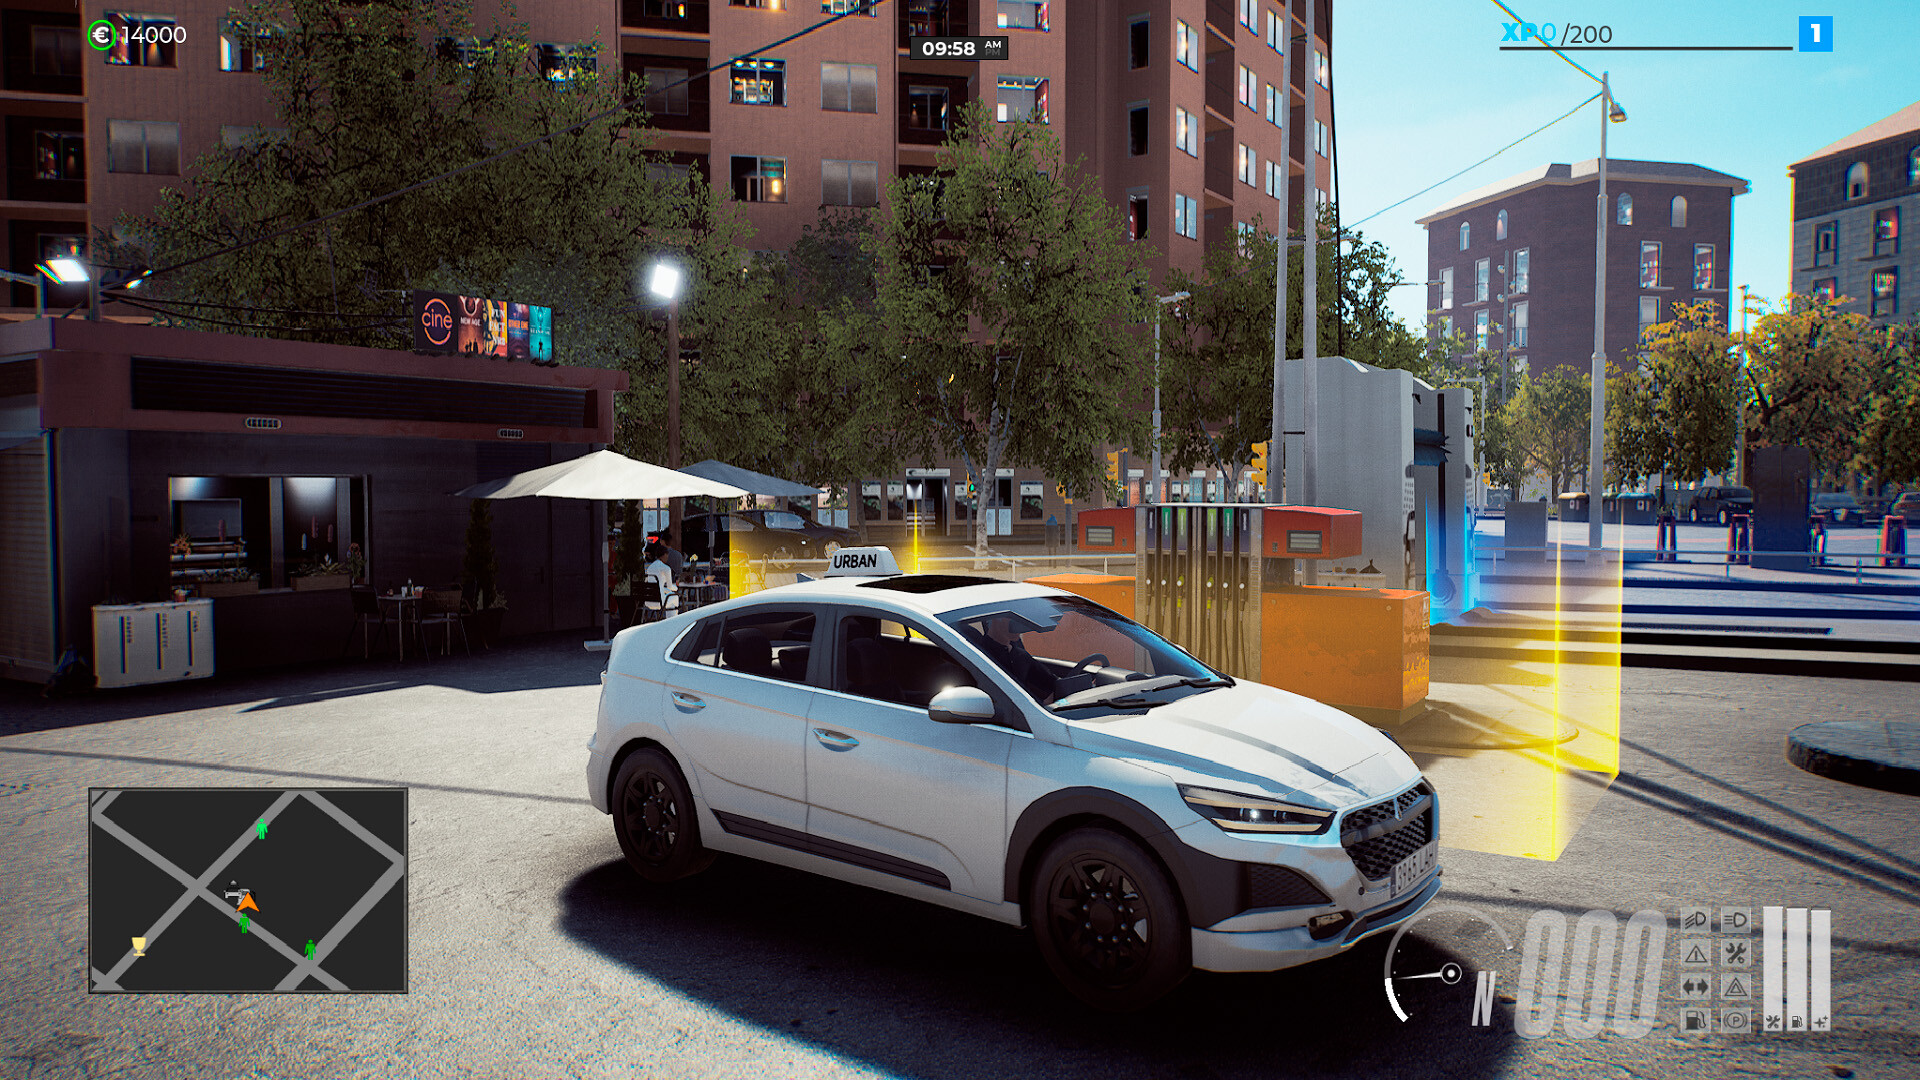 Idle Sloth💙💛 on X: Taxi Life: A City Driving Simulator  Official  Trailer 🚖 - A vast, dynamic city environment with day/night cycles and  weather effects - Realistic driving mechanics and diverse